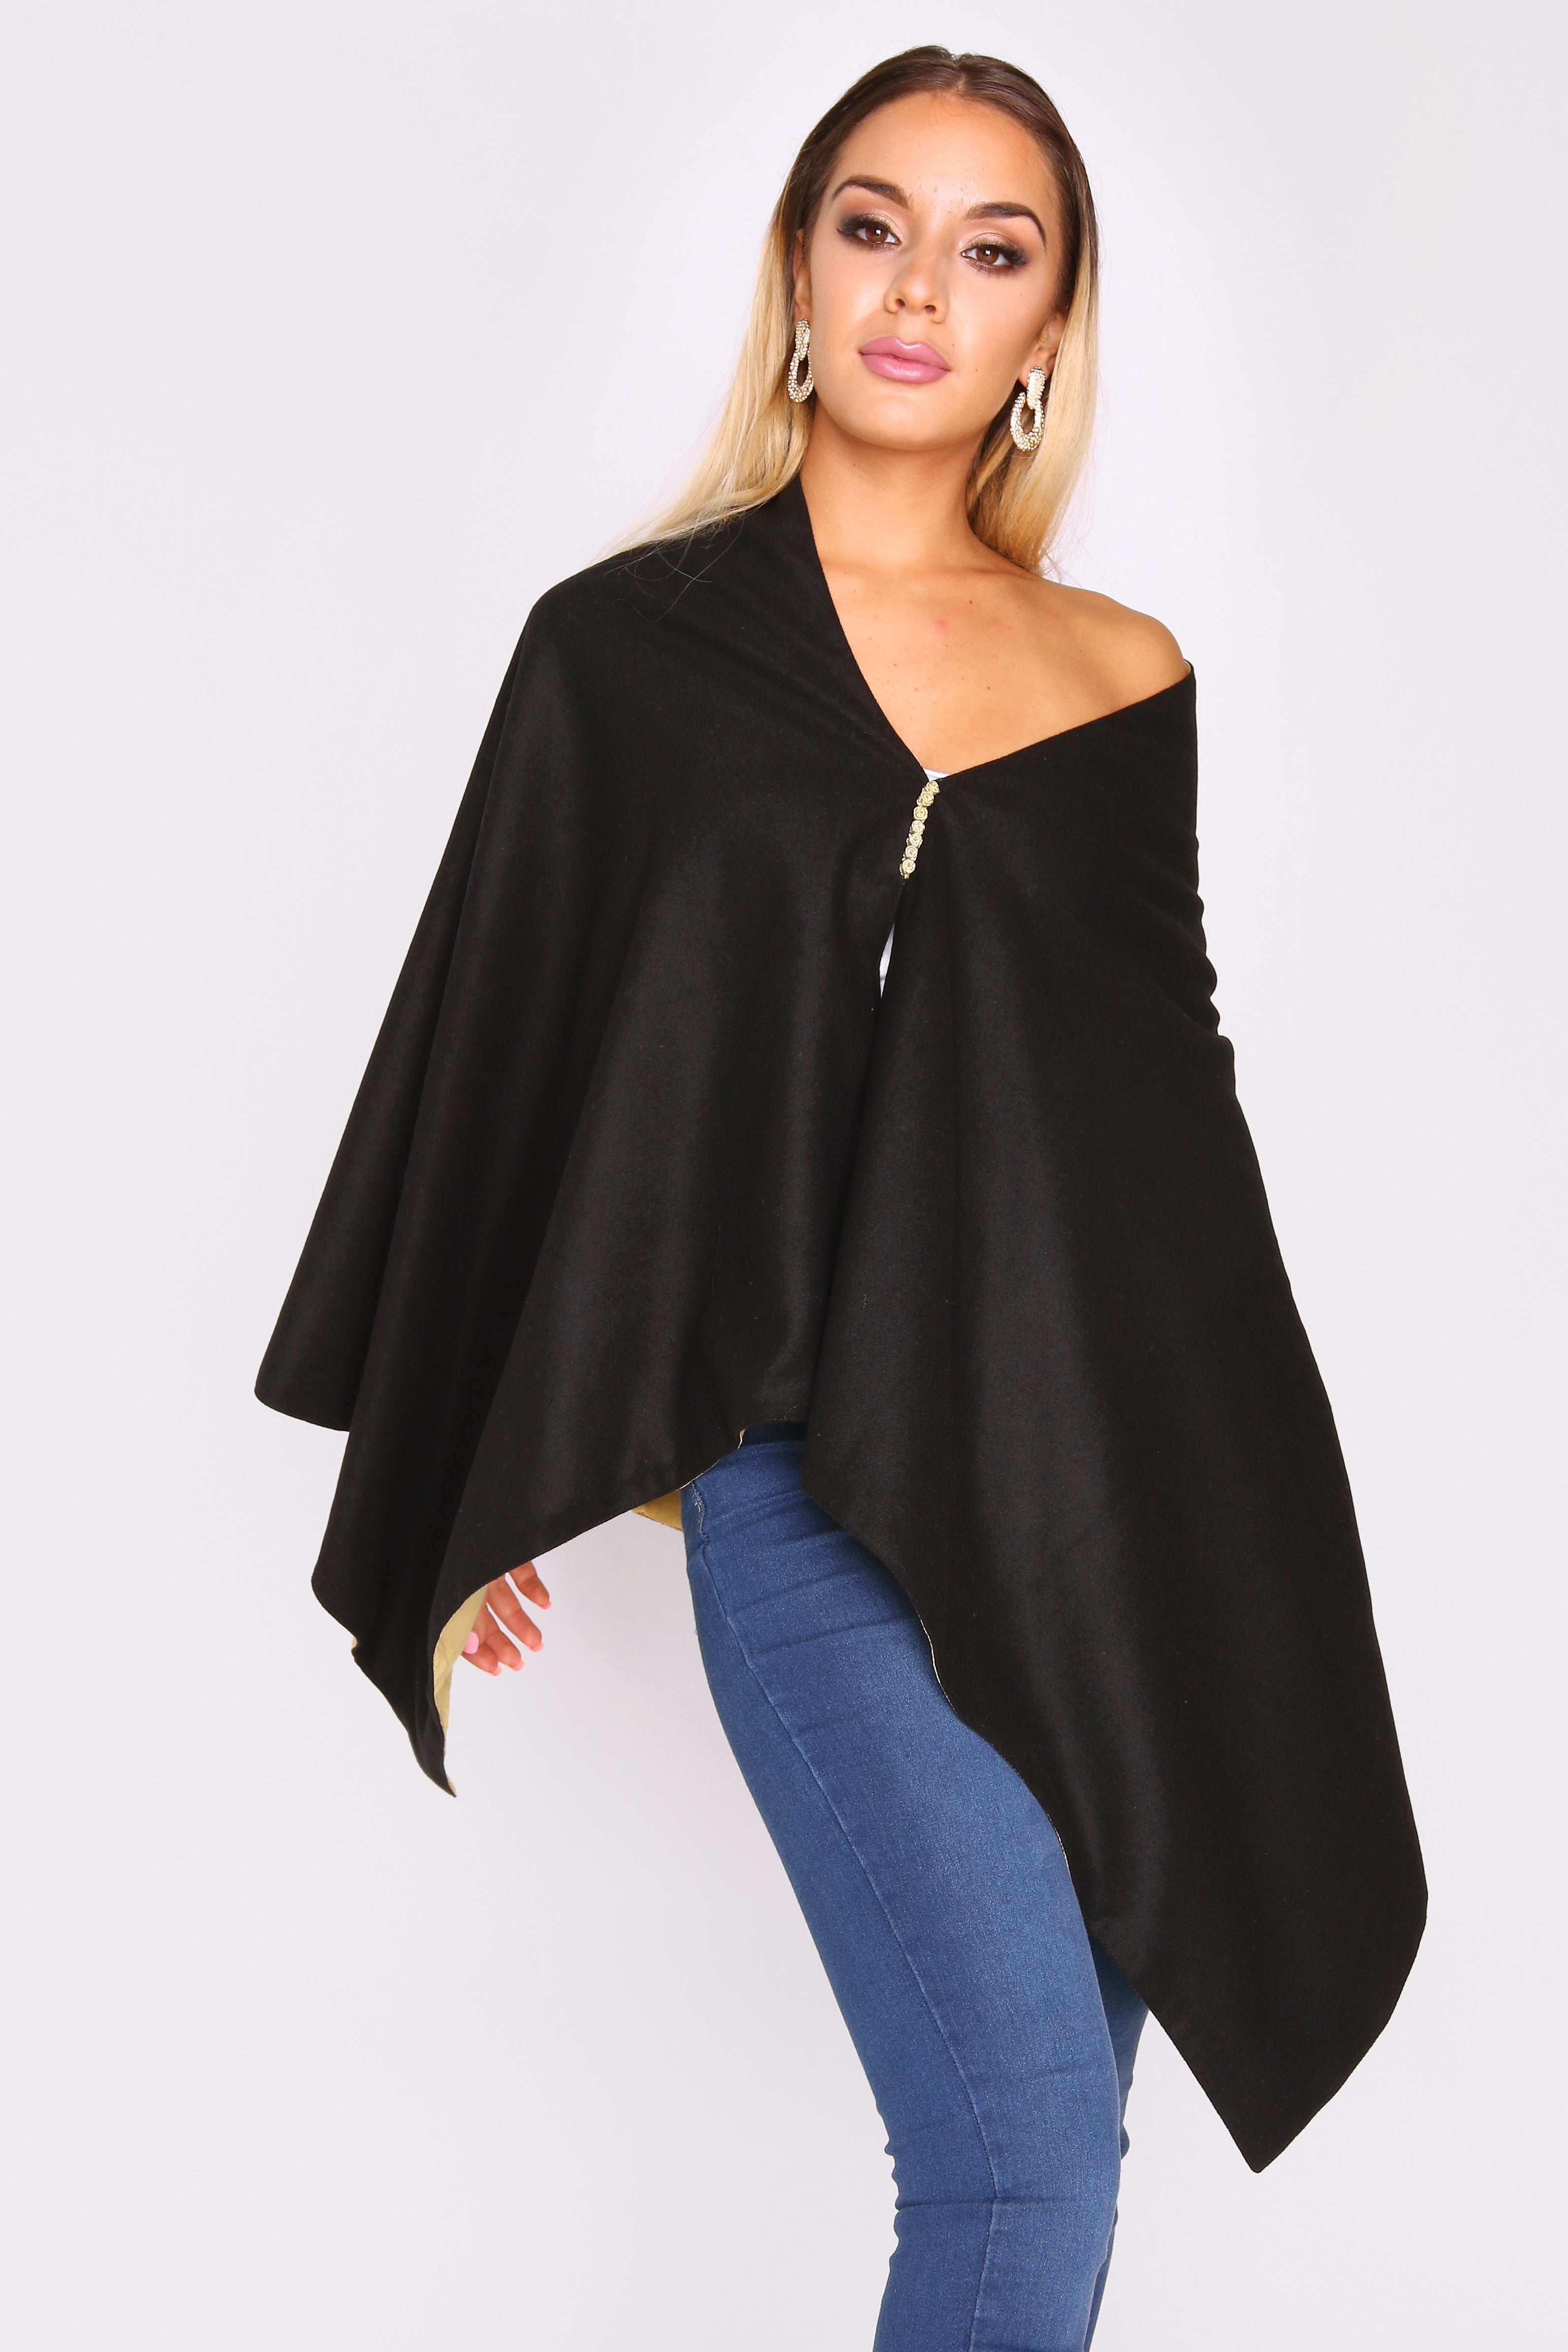 Lilya Collarless Longline Cape Jacket in Contrast Two-Tone Black and Lime Green